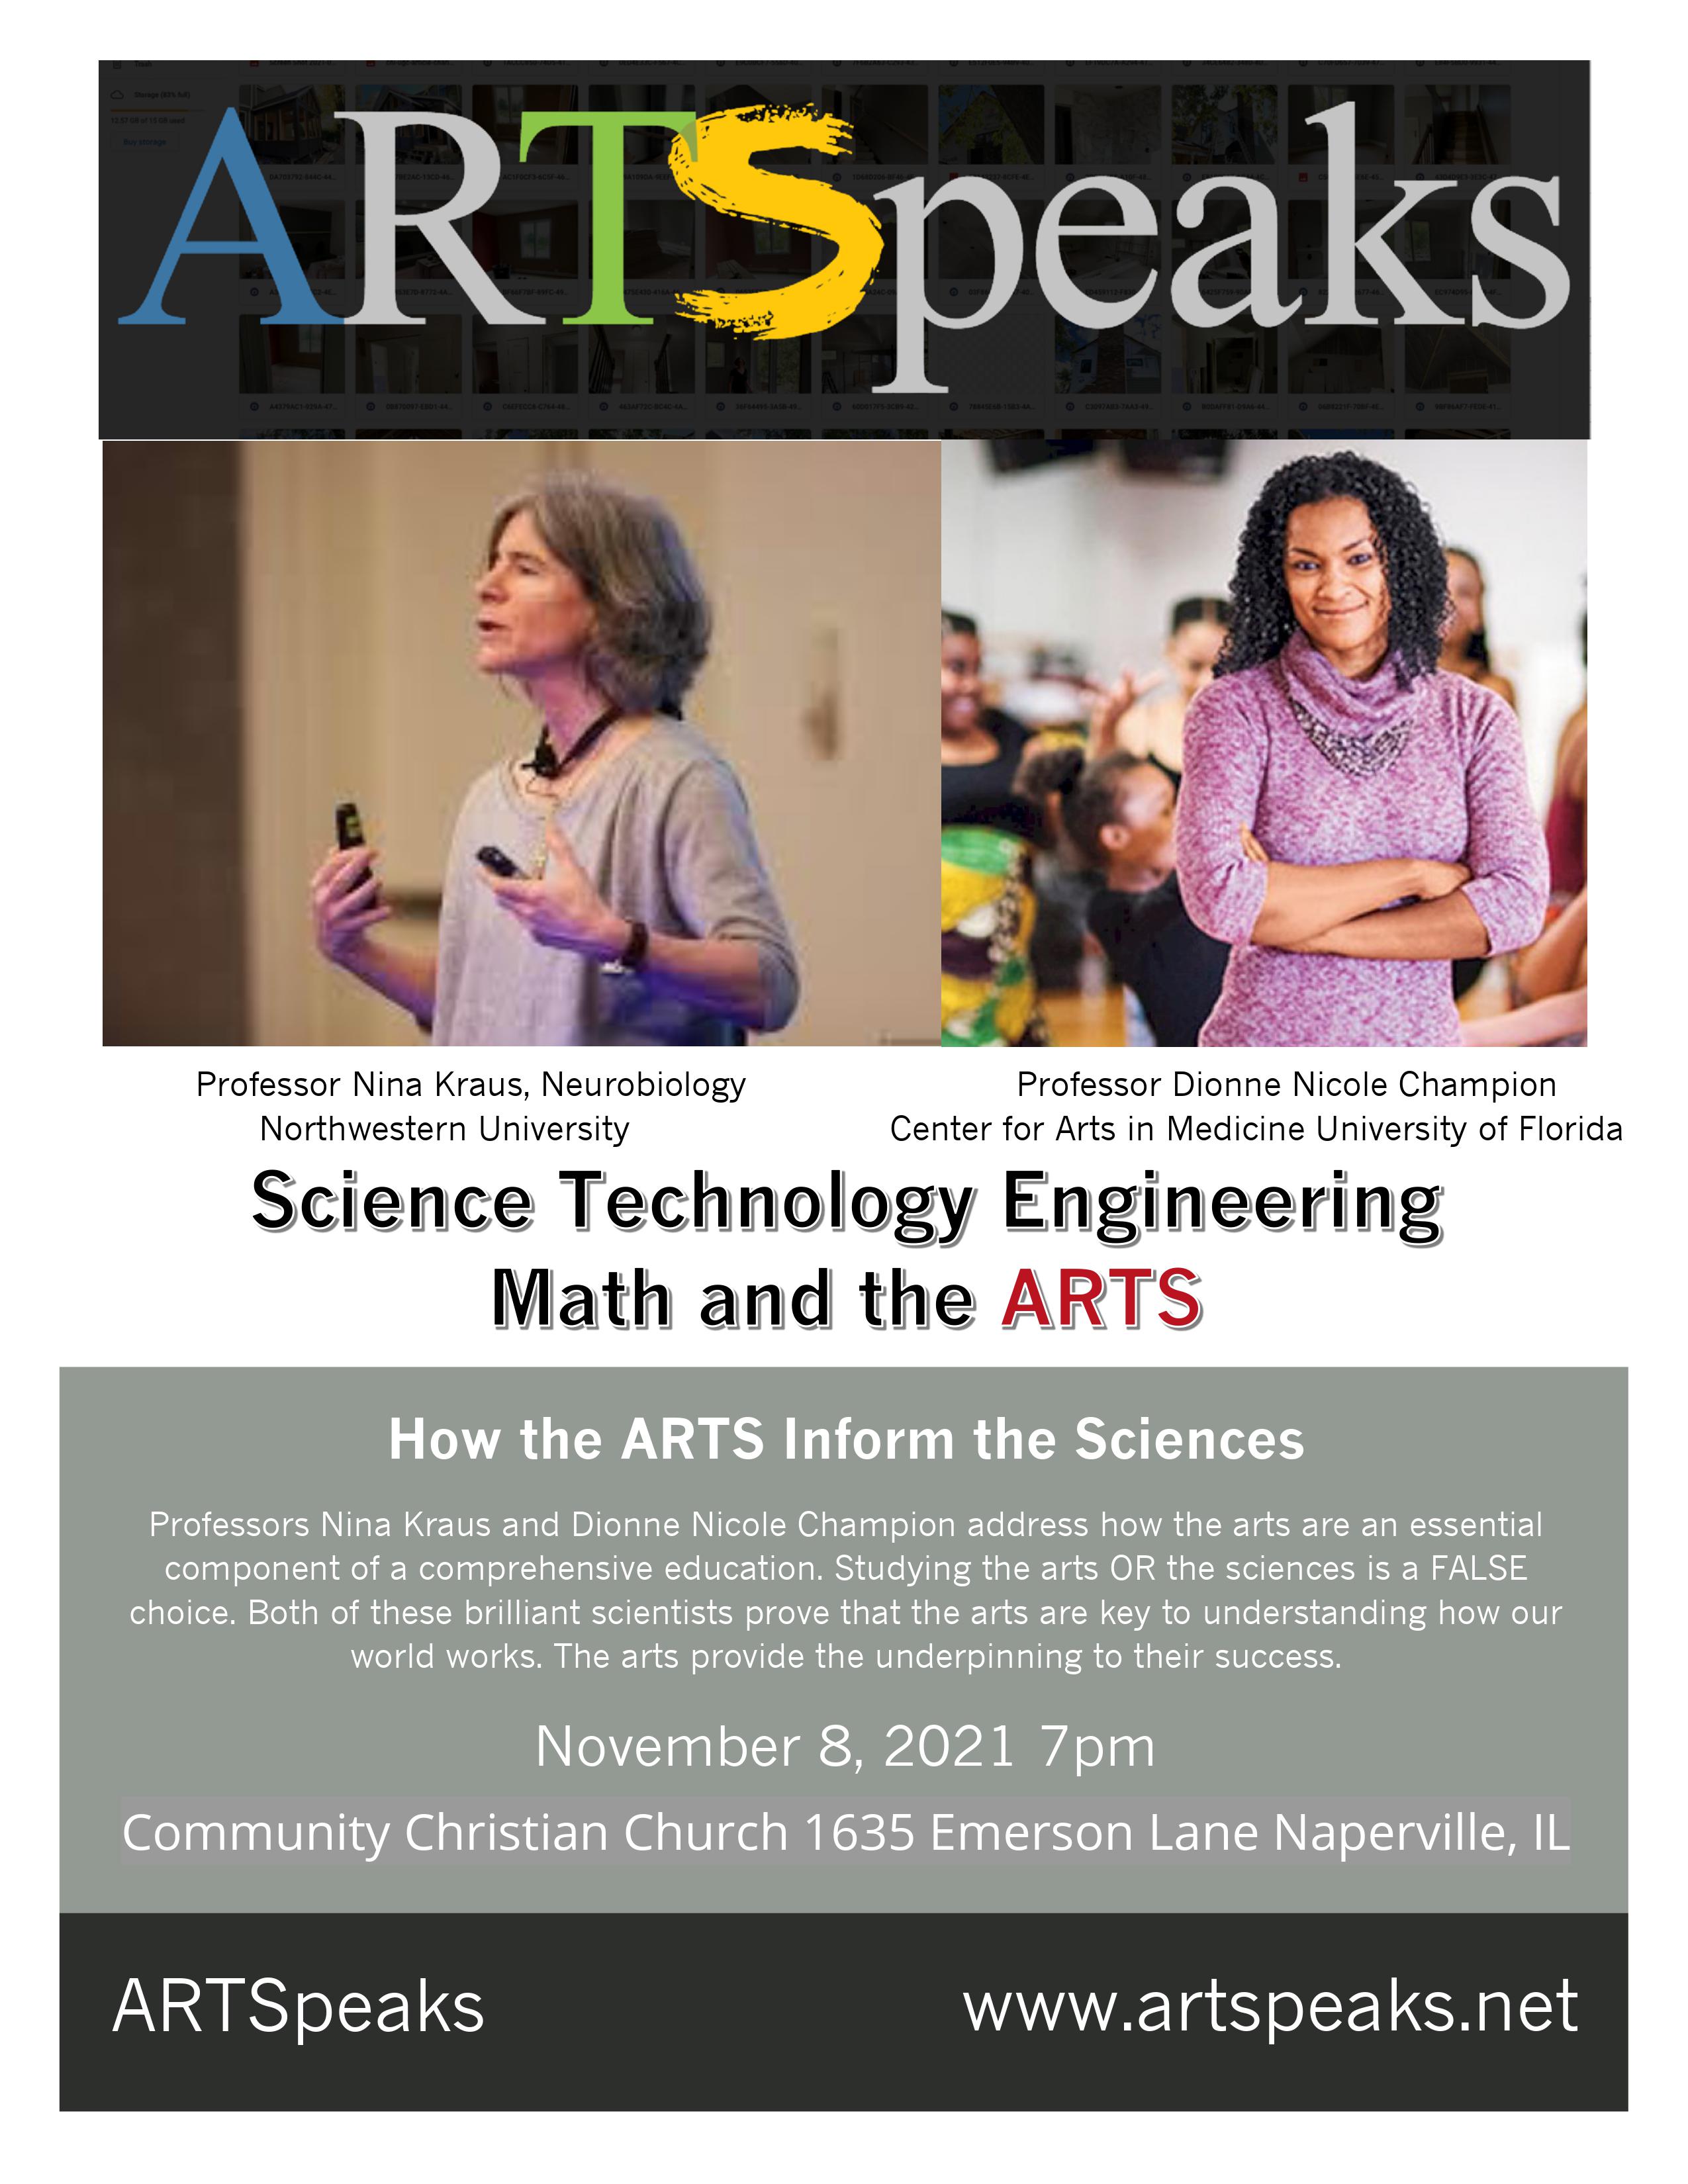 Science Technology Engineering Maths & the ARTS